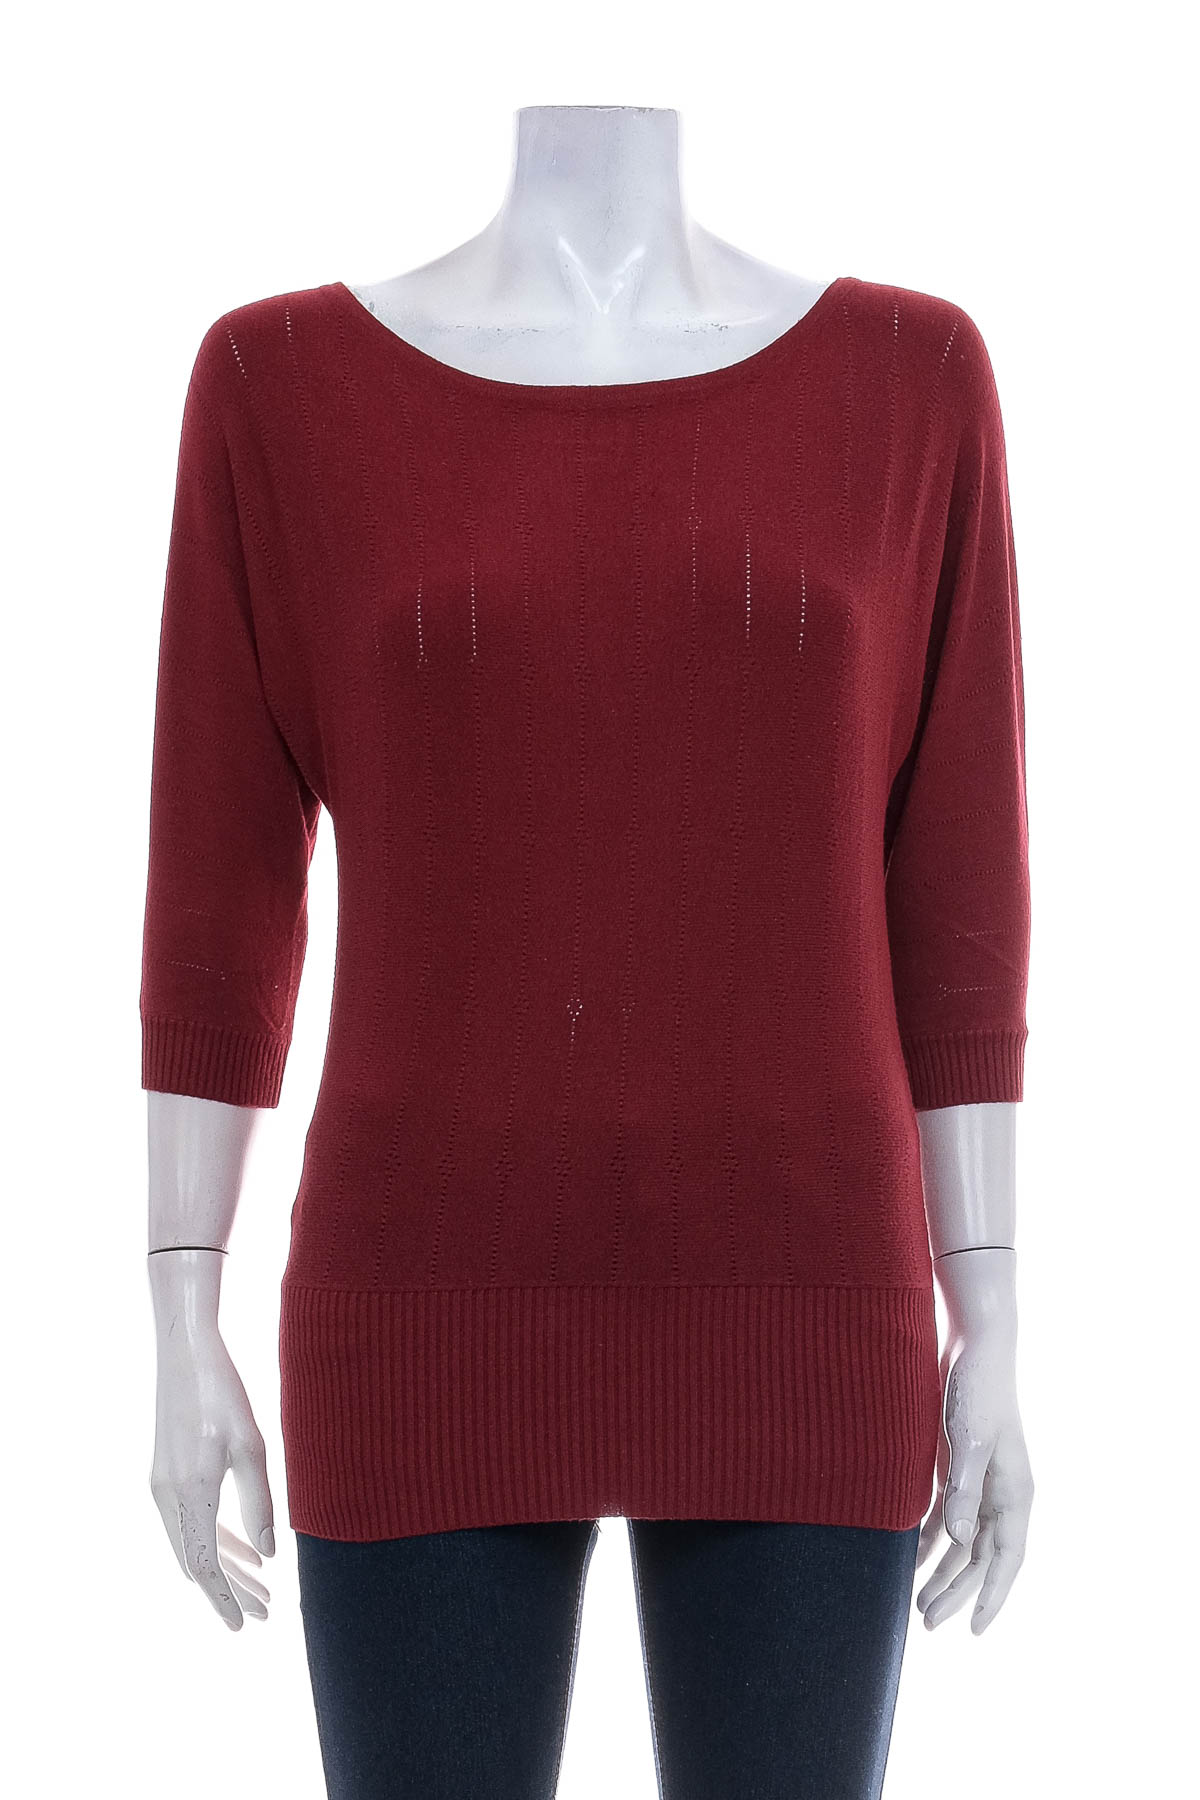 Women's sweater - Collectif - 0